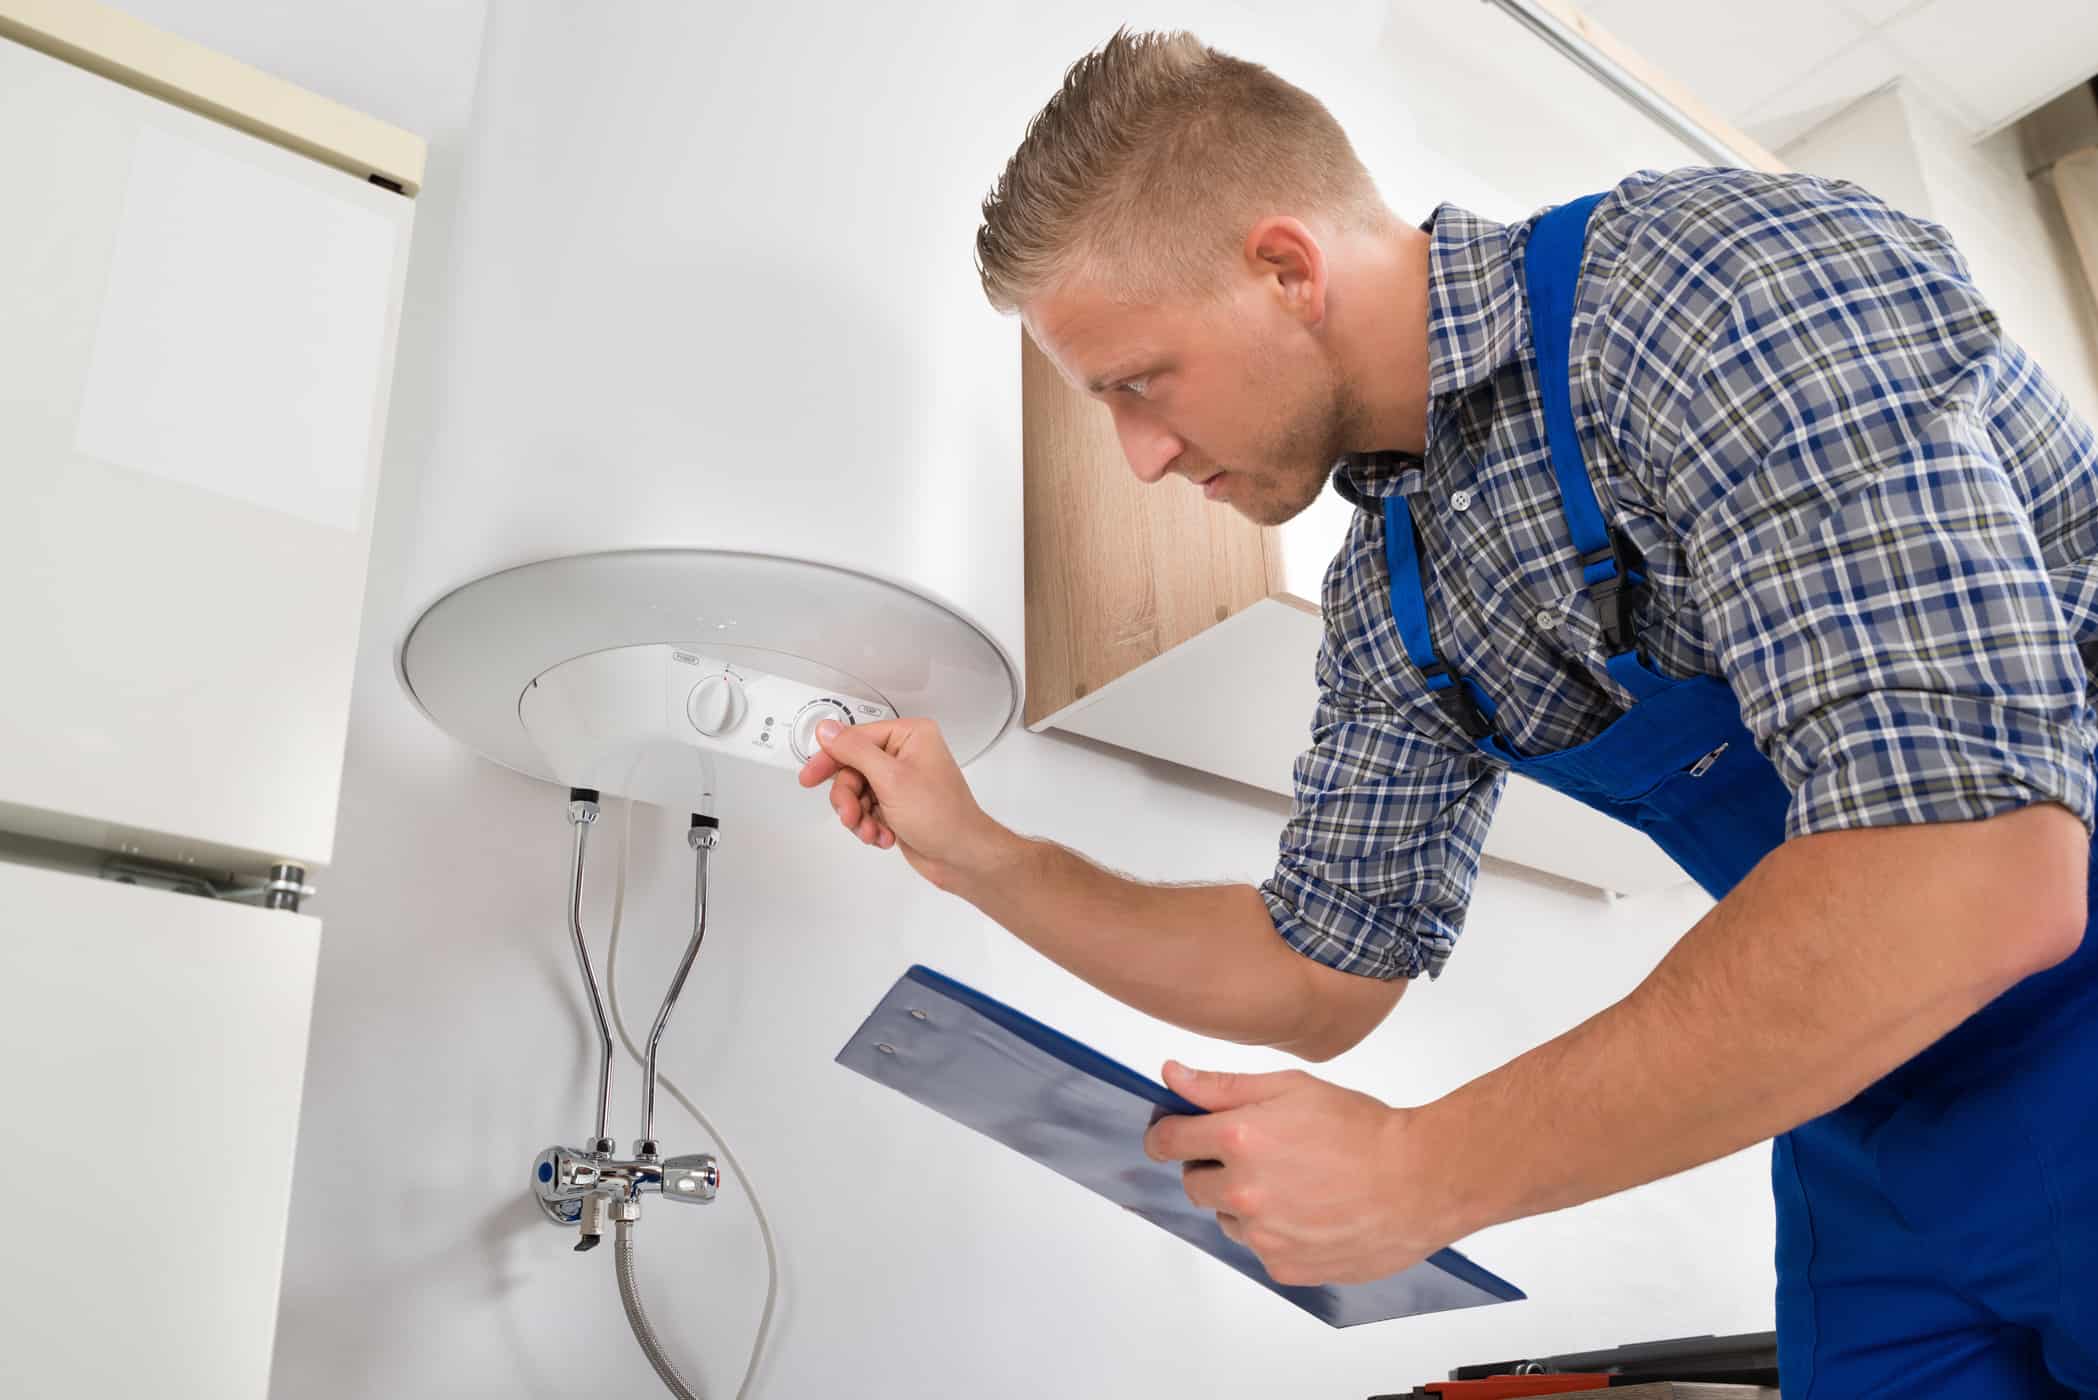 Do You Call a Plumber to Fix a Hot Water Heater?